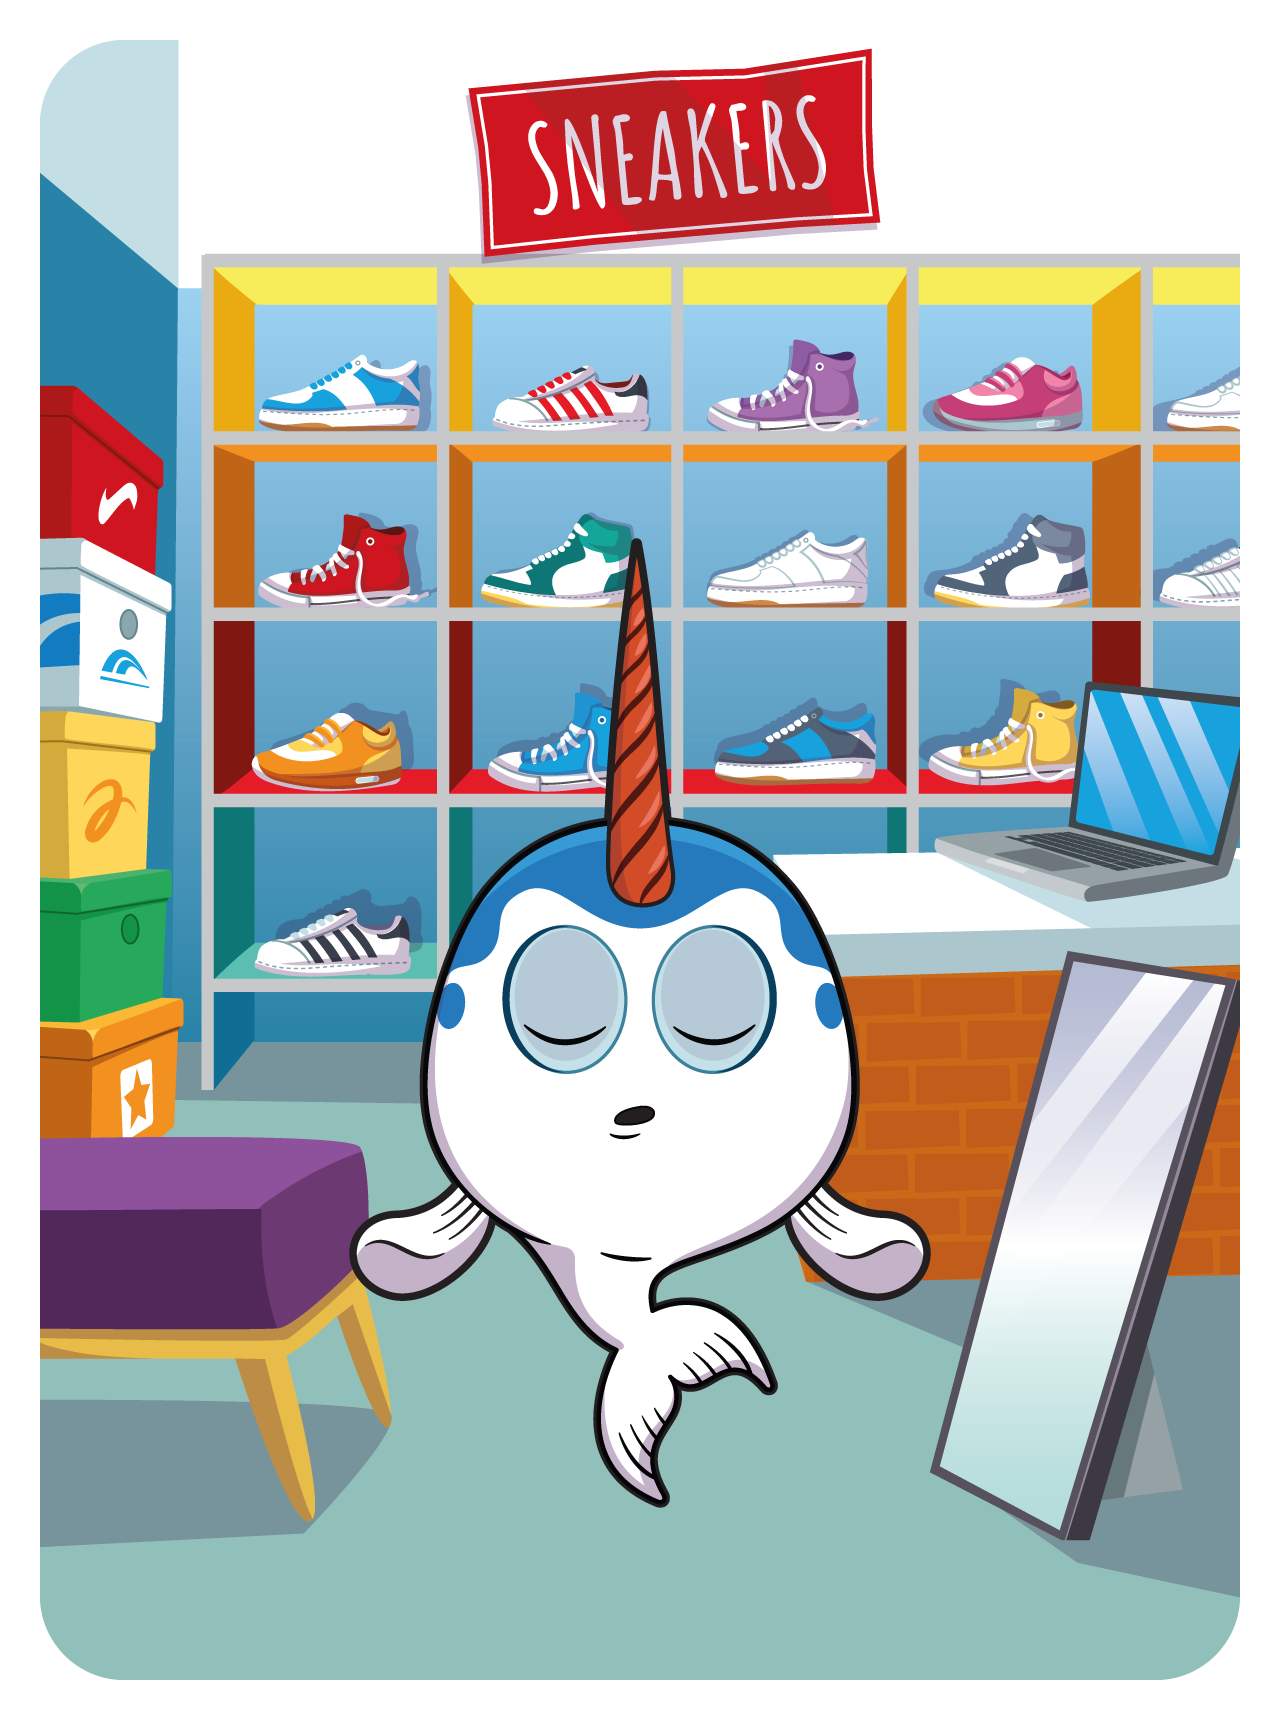 Nifty Narwhal #19263